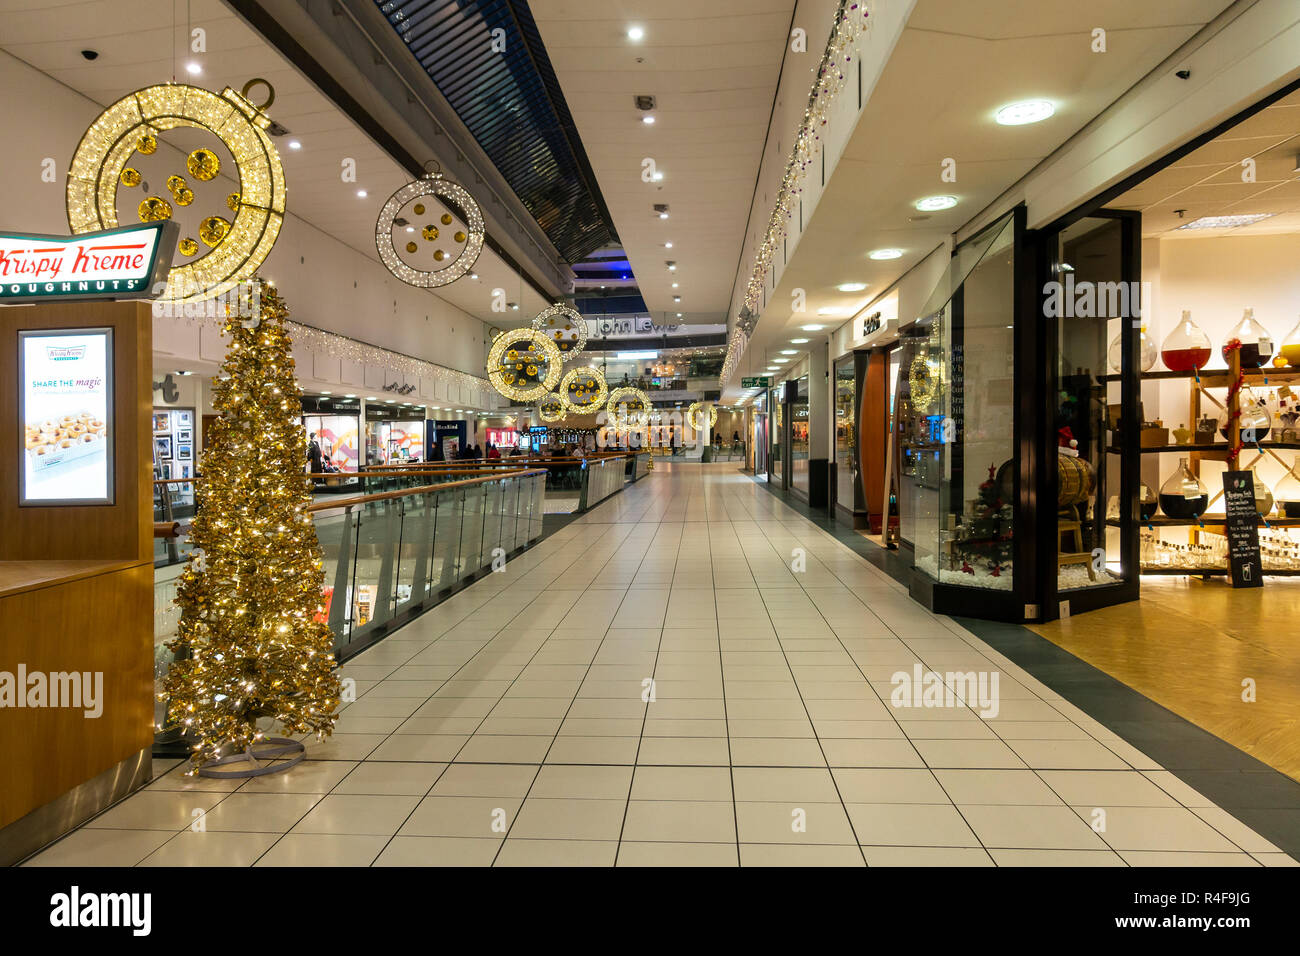 A section of Buchan Galleries shopping mall in the centre of Glasgow, Scotland, decorated for Christmas. Kristy Kreme, gold Christmas tree, John Lewis Stock Photo